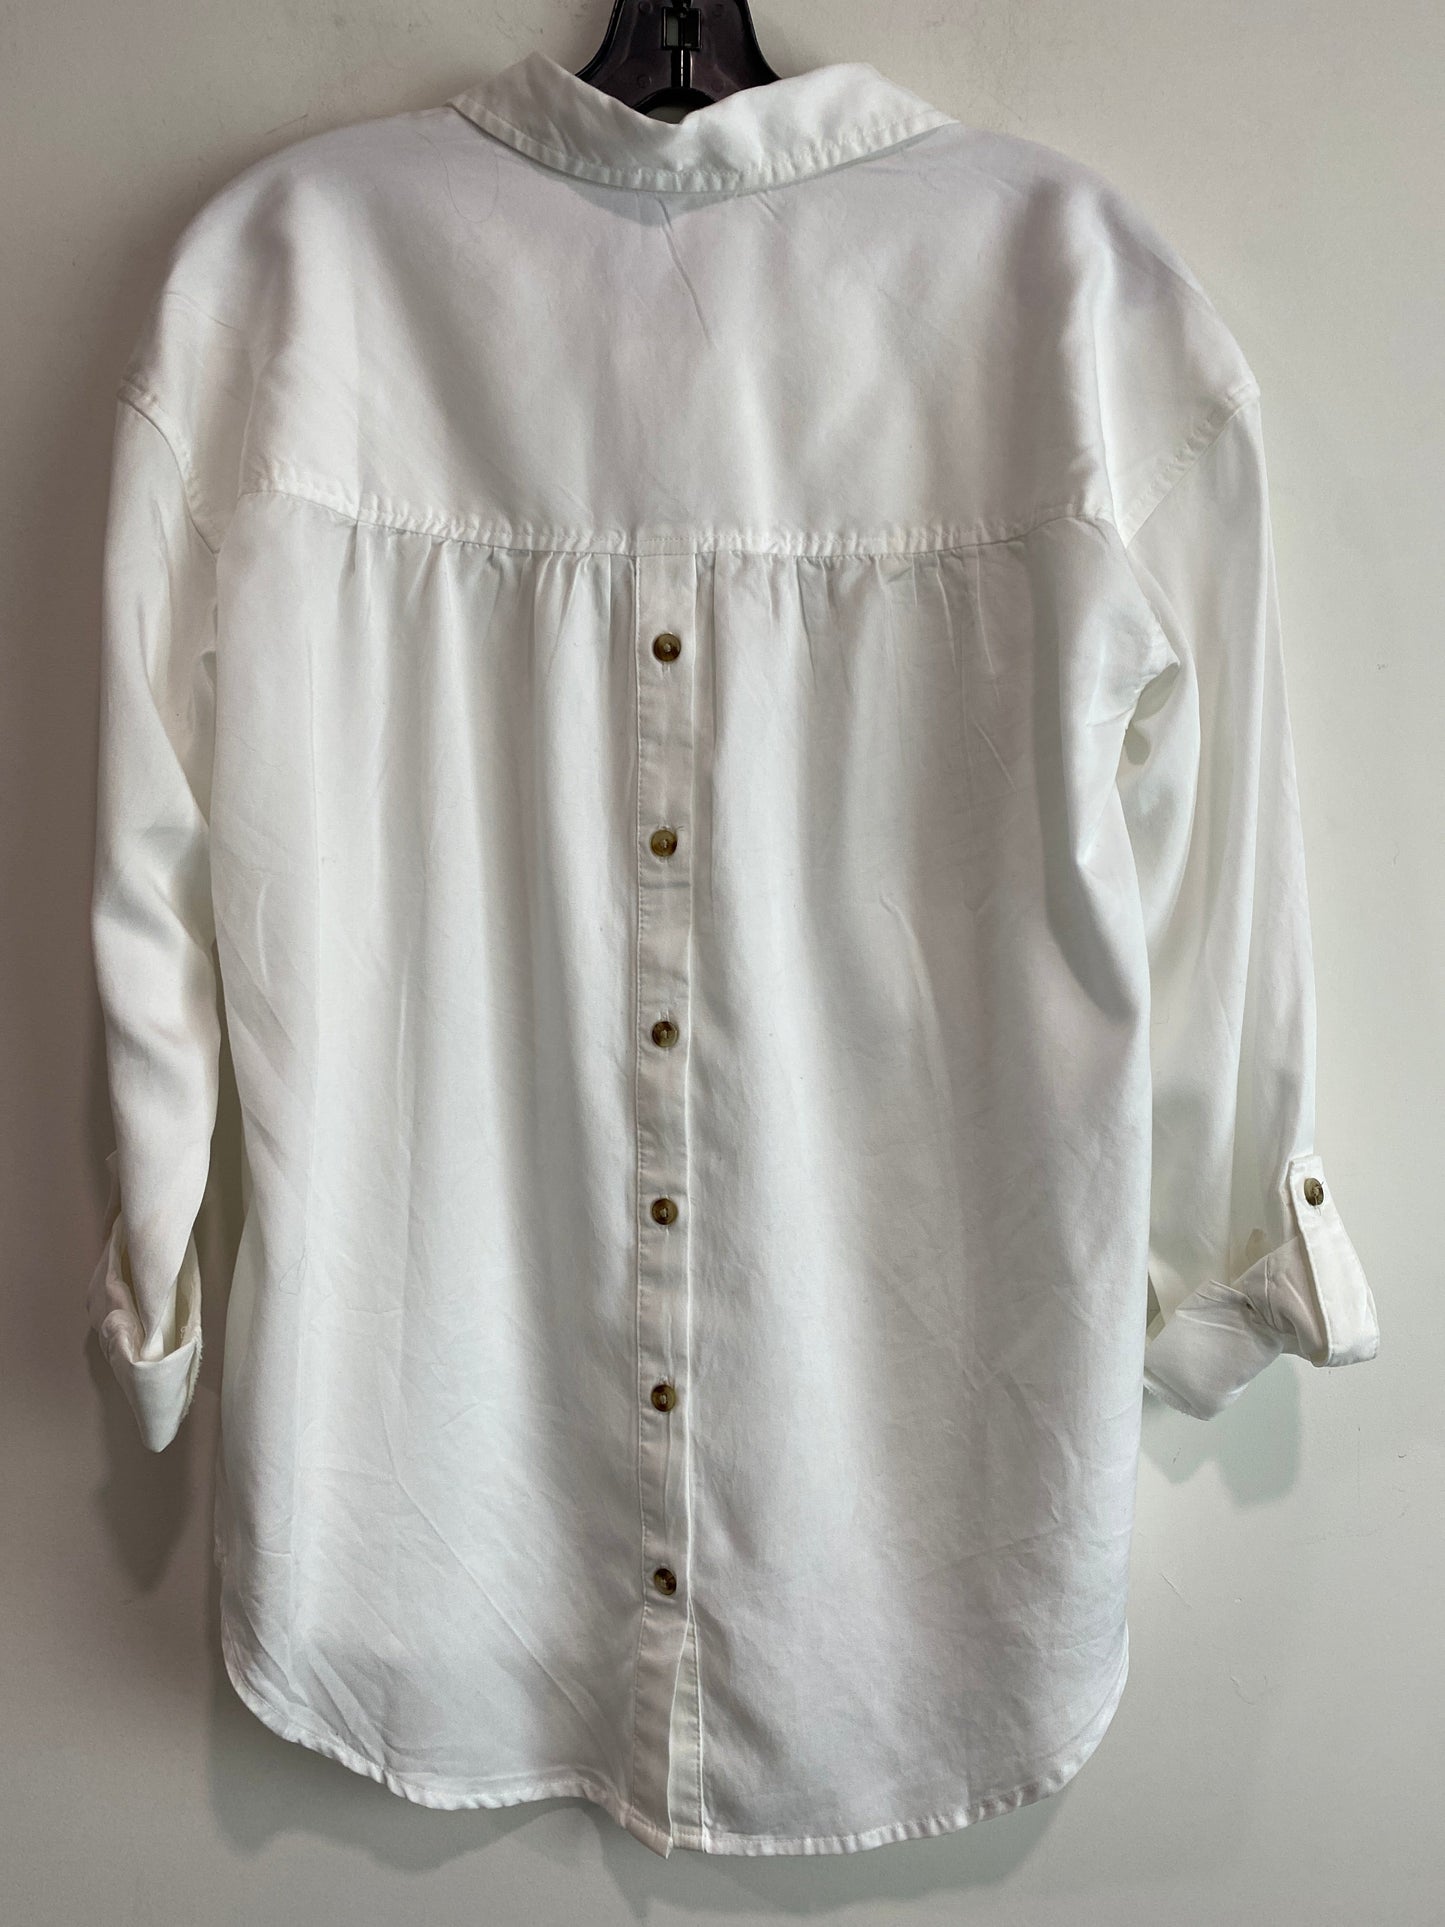 White Top Long Sleeve New Directions, Size M